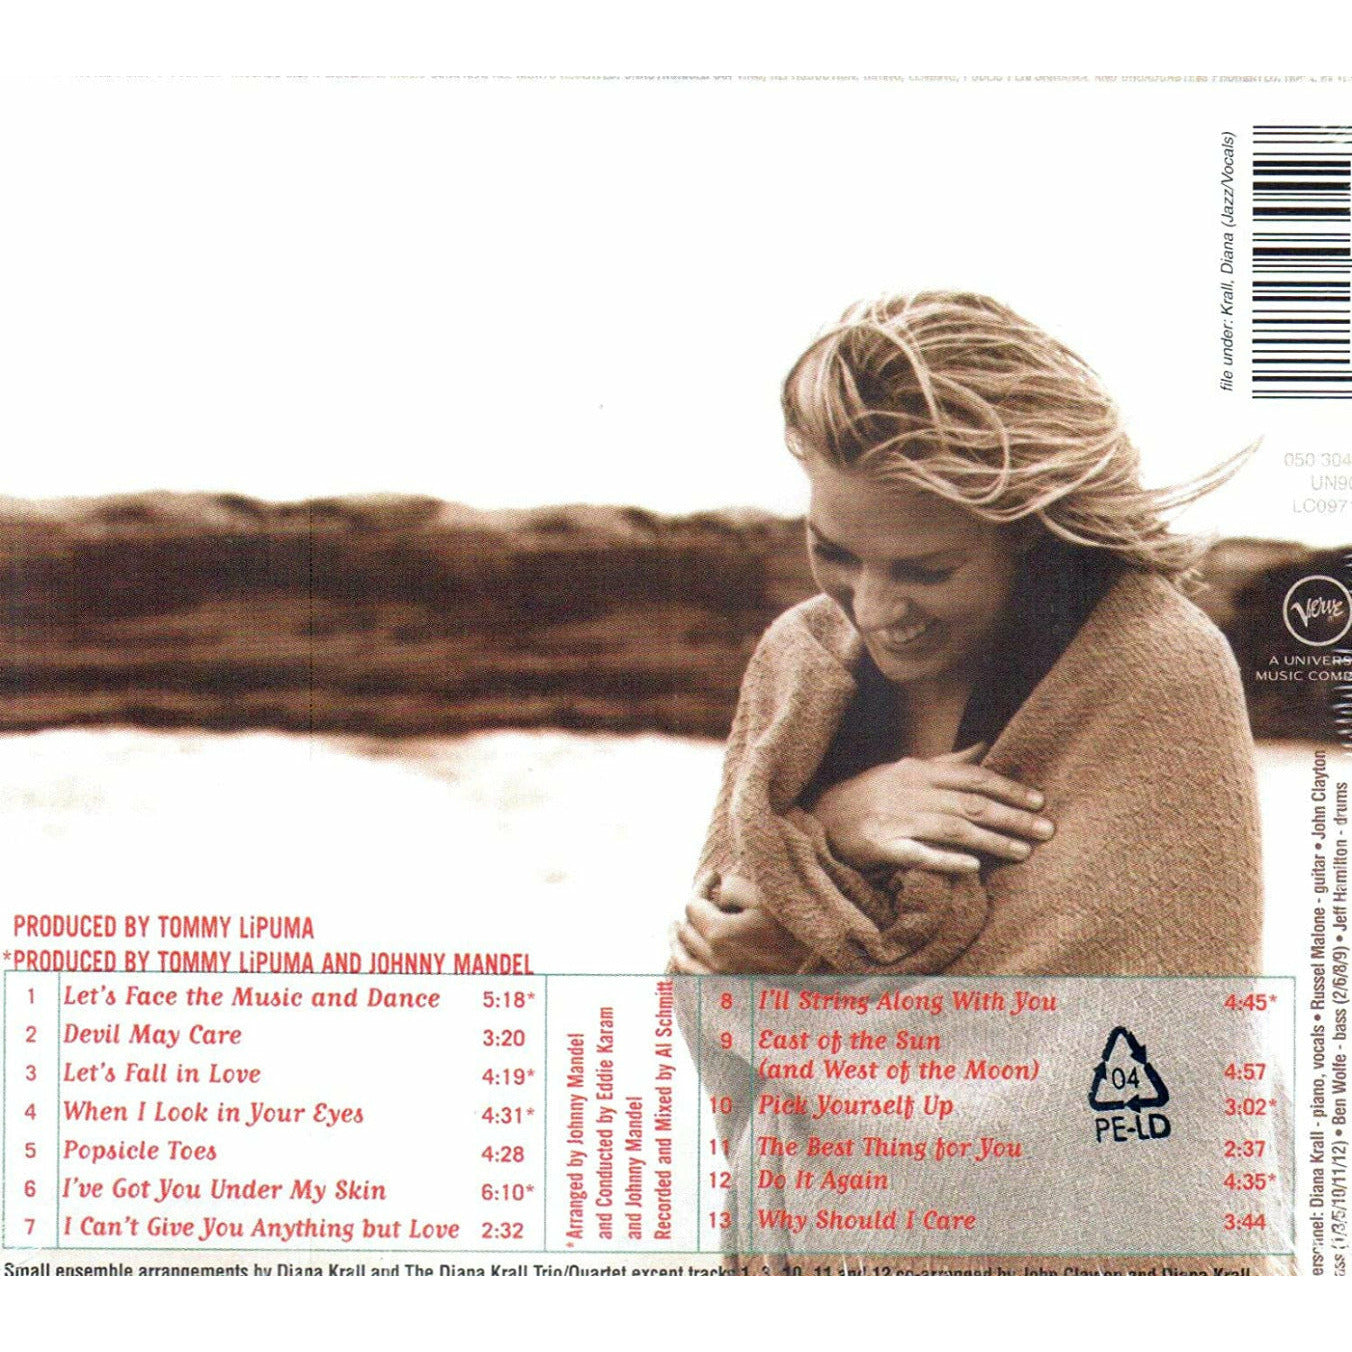 Diana Krall "When I Look In Your Eyes" CD